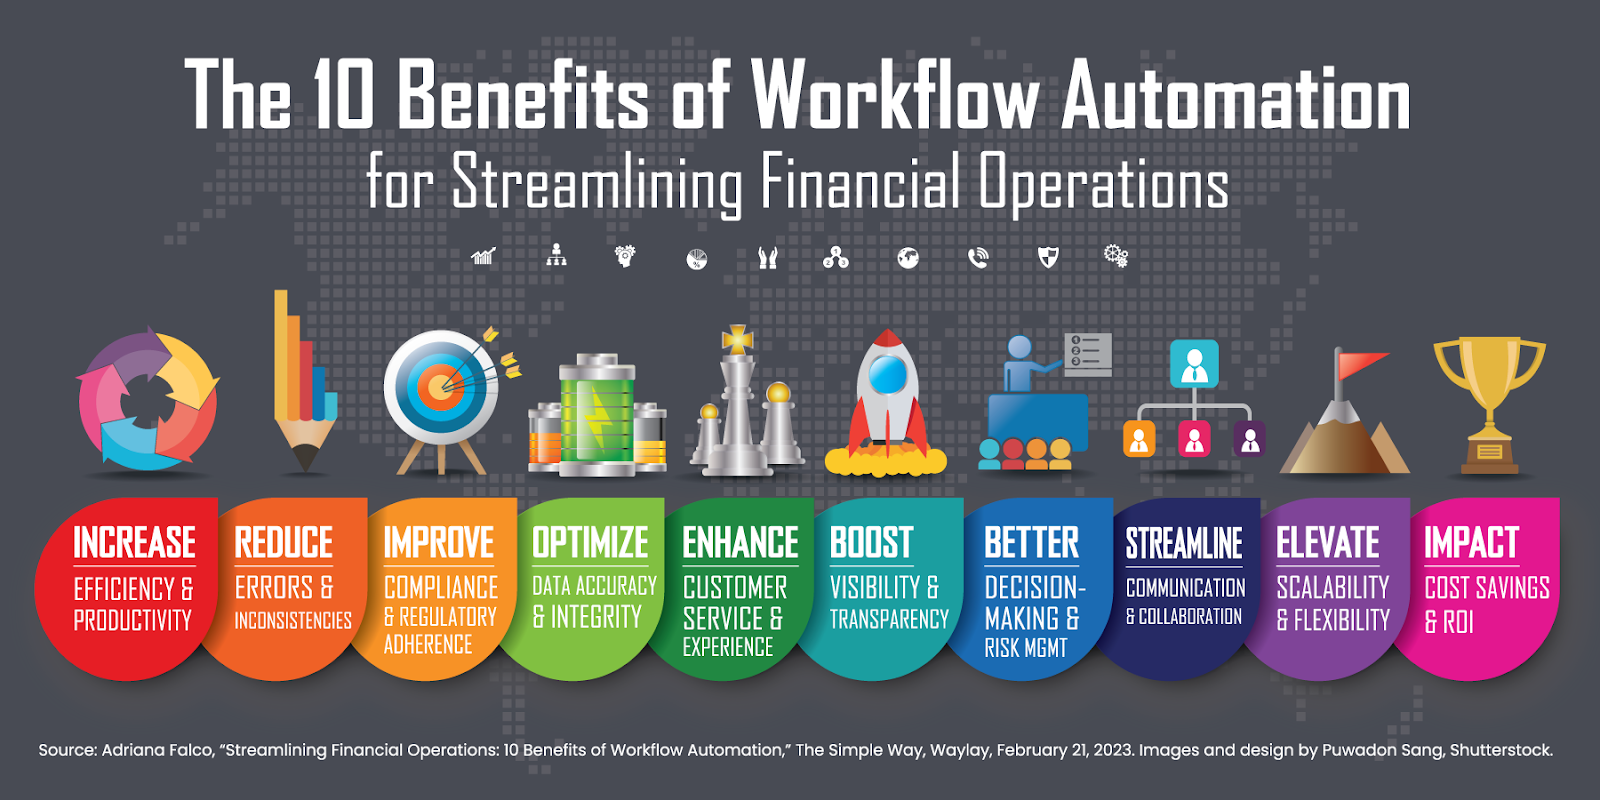 The 10 Benefits of Workflow Automation